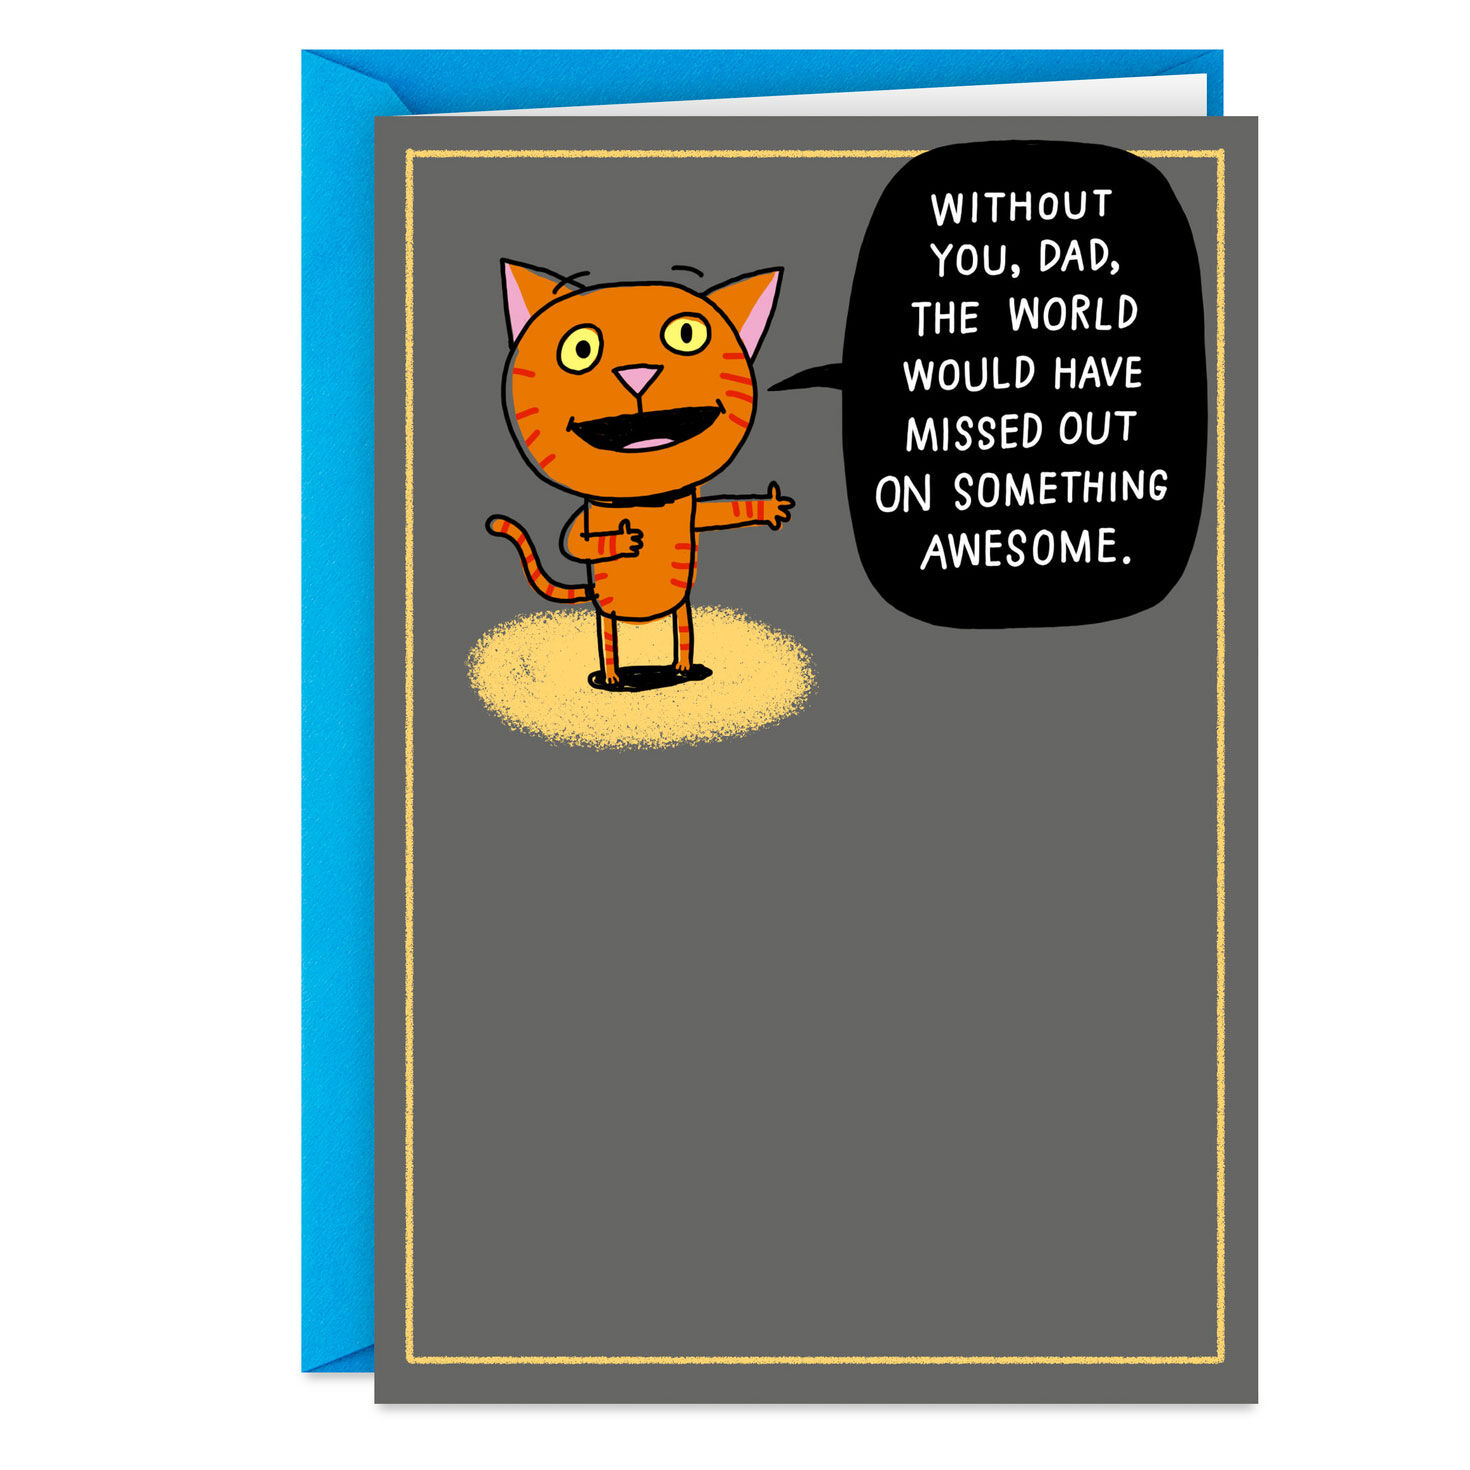 Something Awesome Funny Father's Day Card for Dad for only USD 3.49 | Hallmark